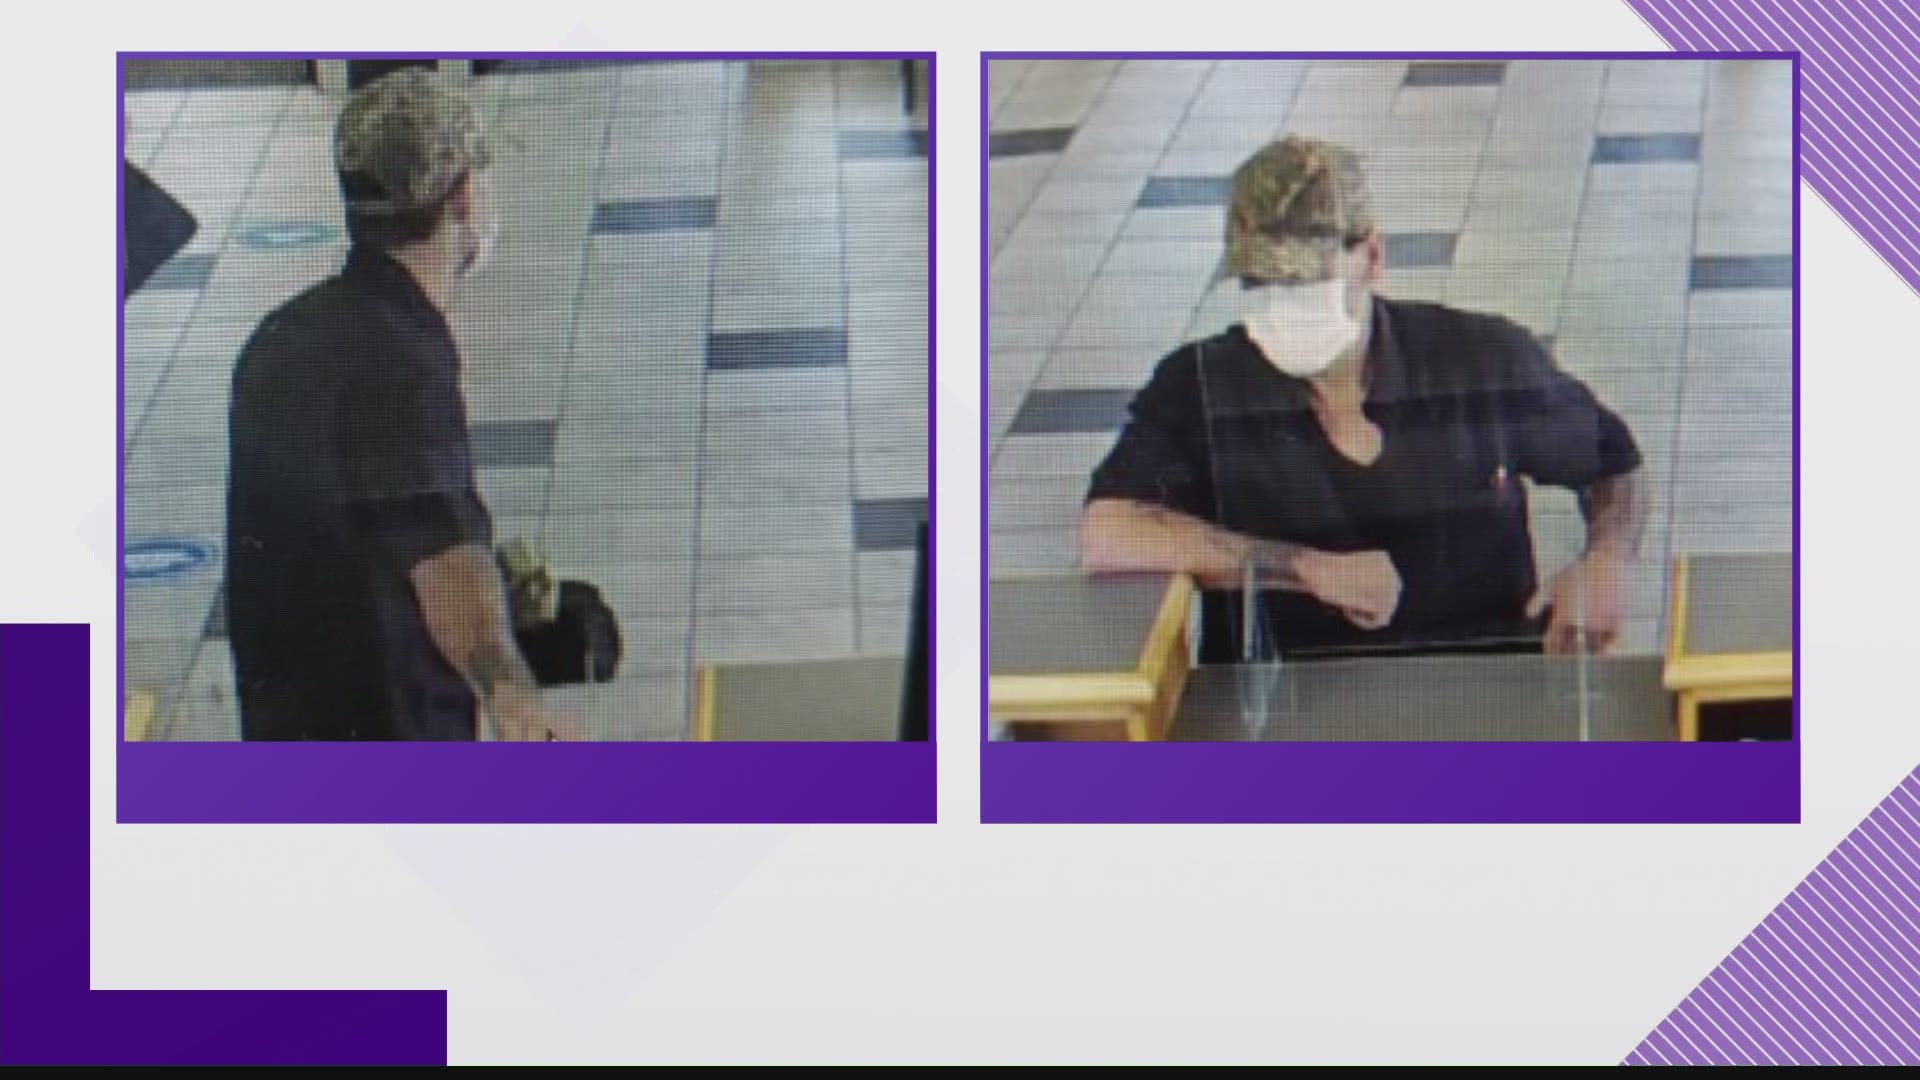 Bangor officials are asking for help in finding the man that robbed the Bangor bank